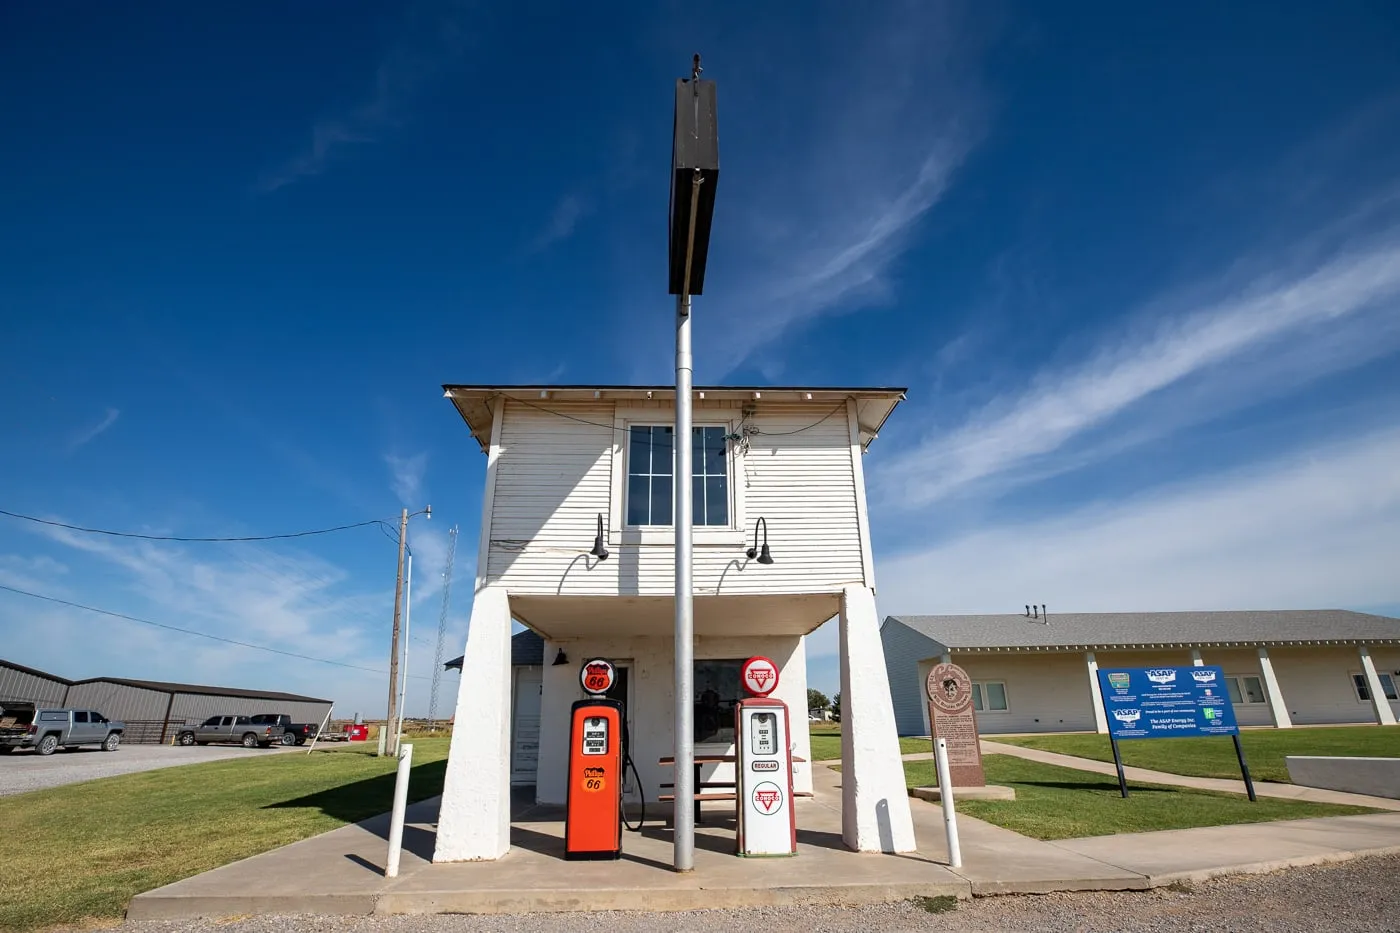 Lucille's Historic Highway Gas Station in Hydro, Oklahoma on Route 66